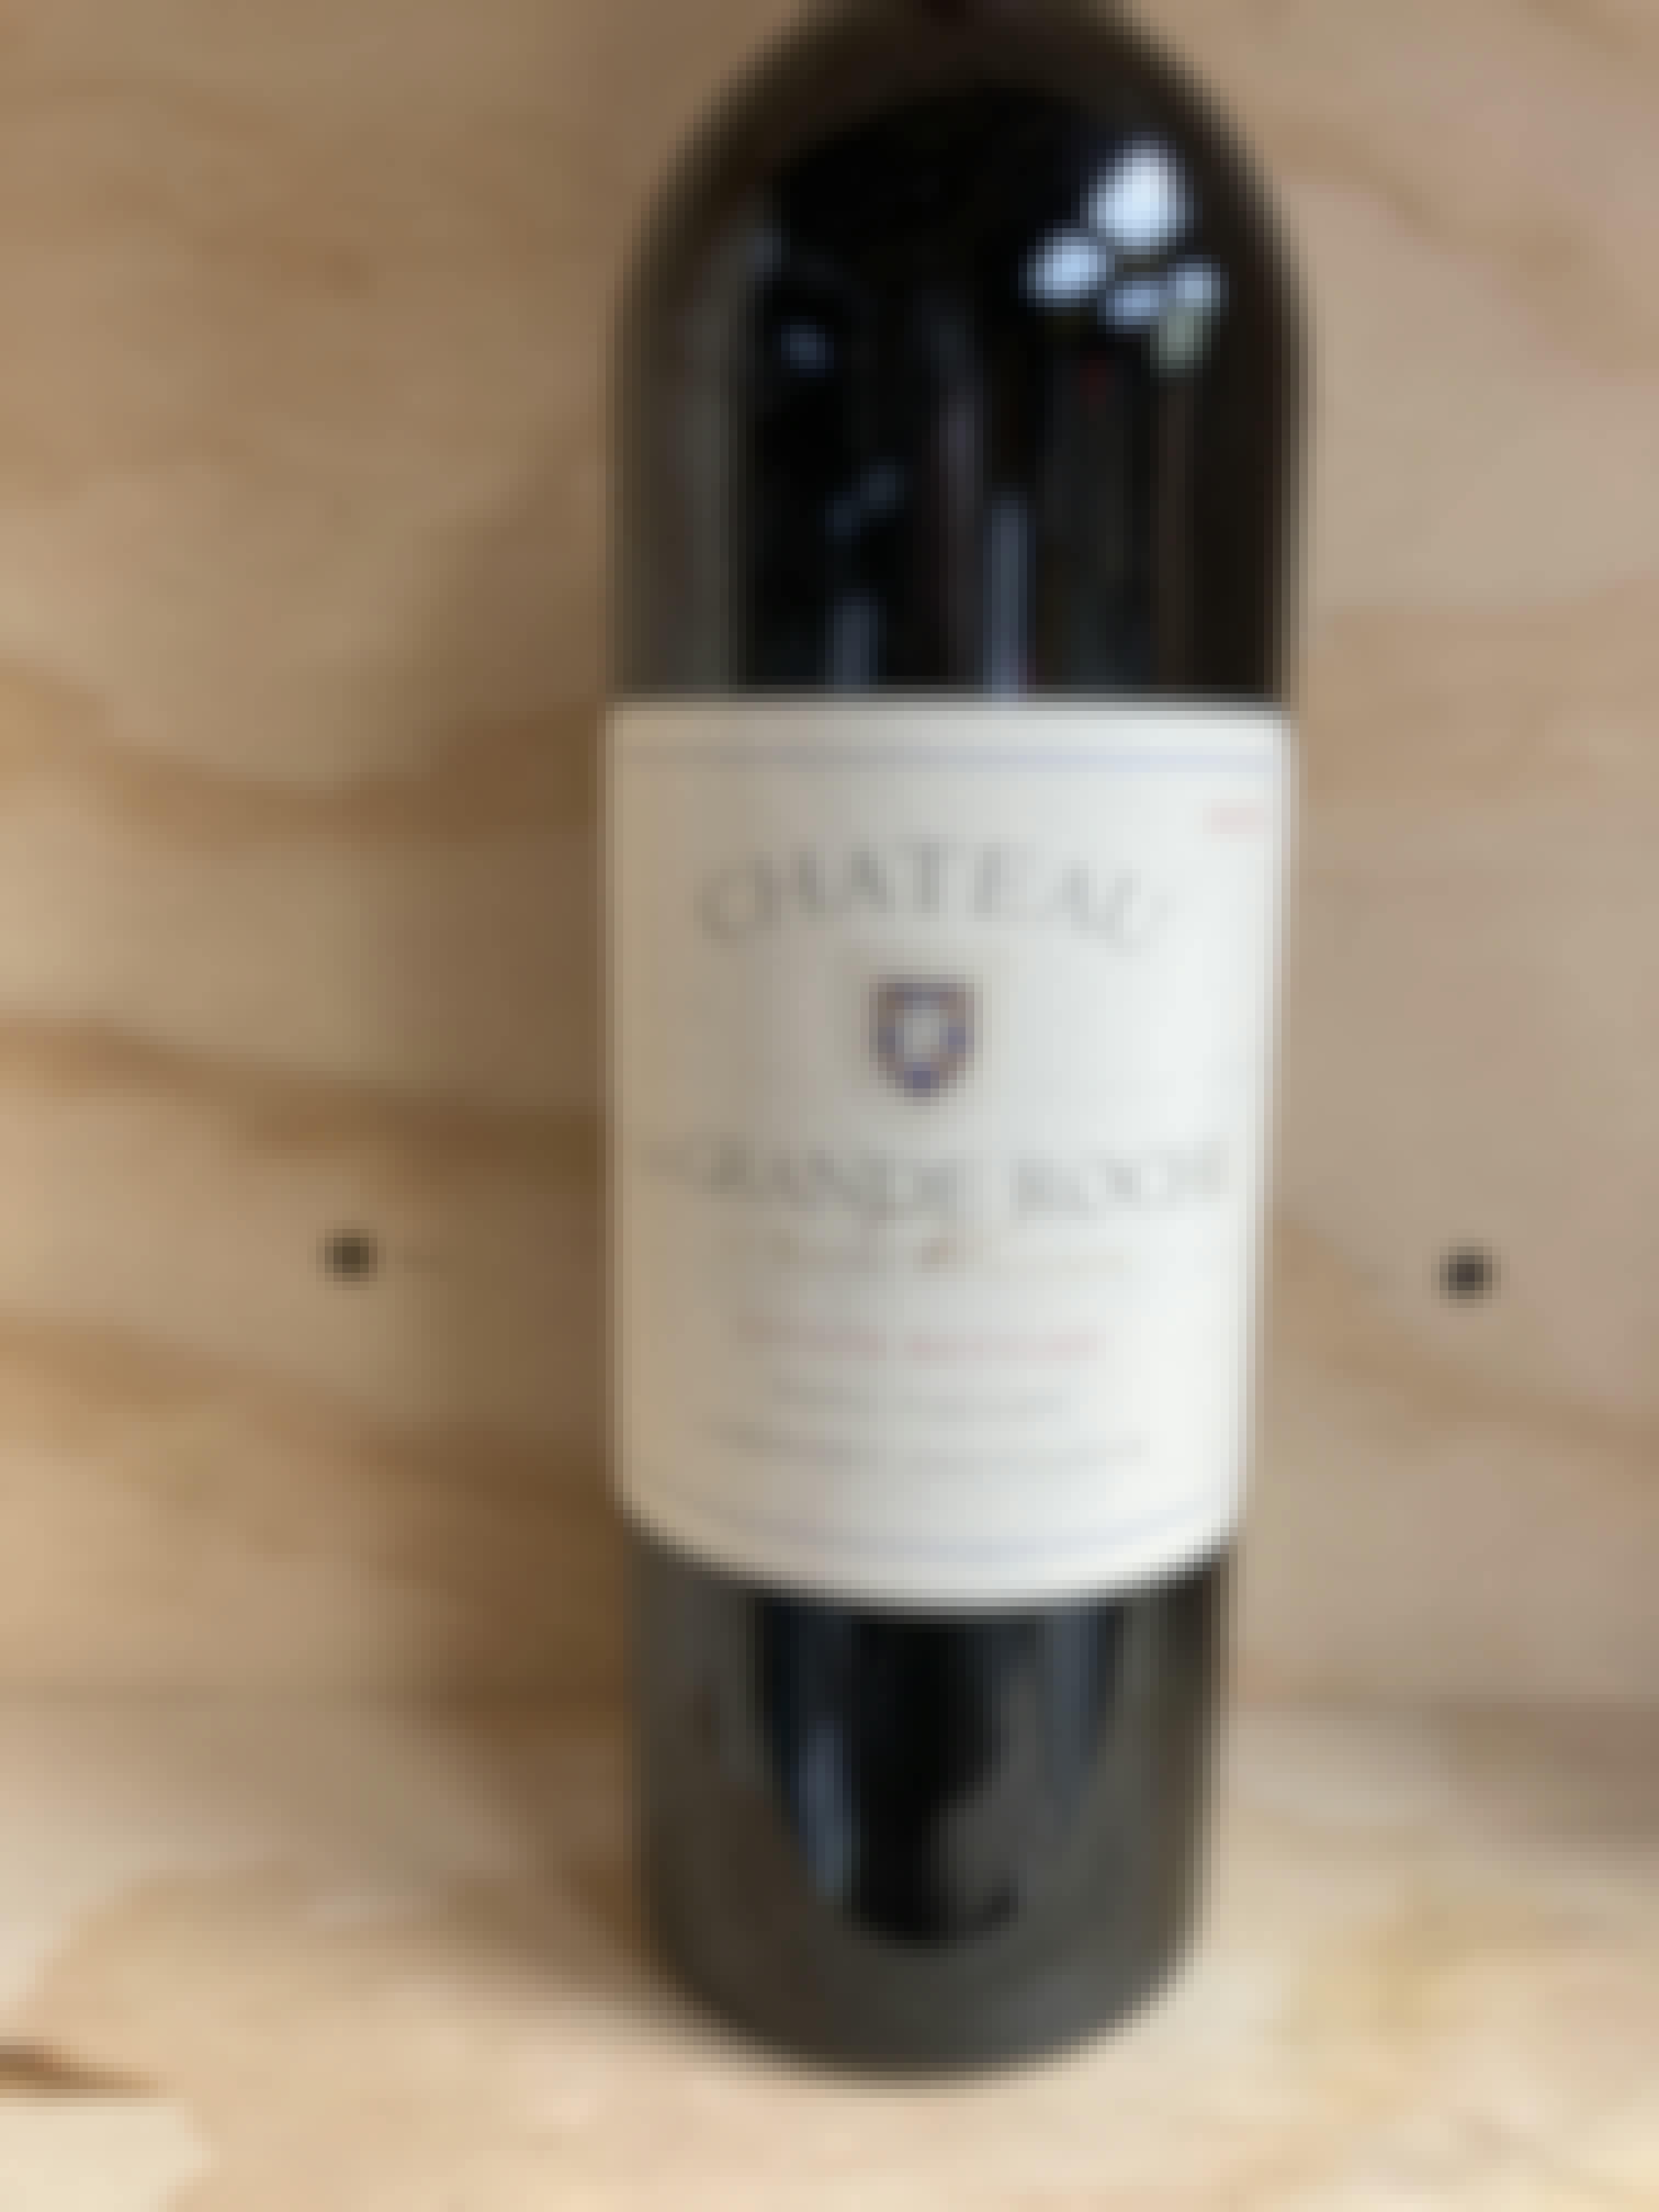 Wine - Bordeaux Wine - - Franey - $25 - France Enthusiast $50 Domaine to